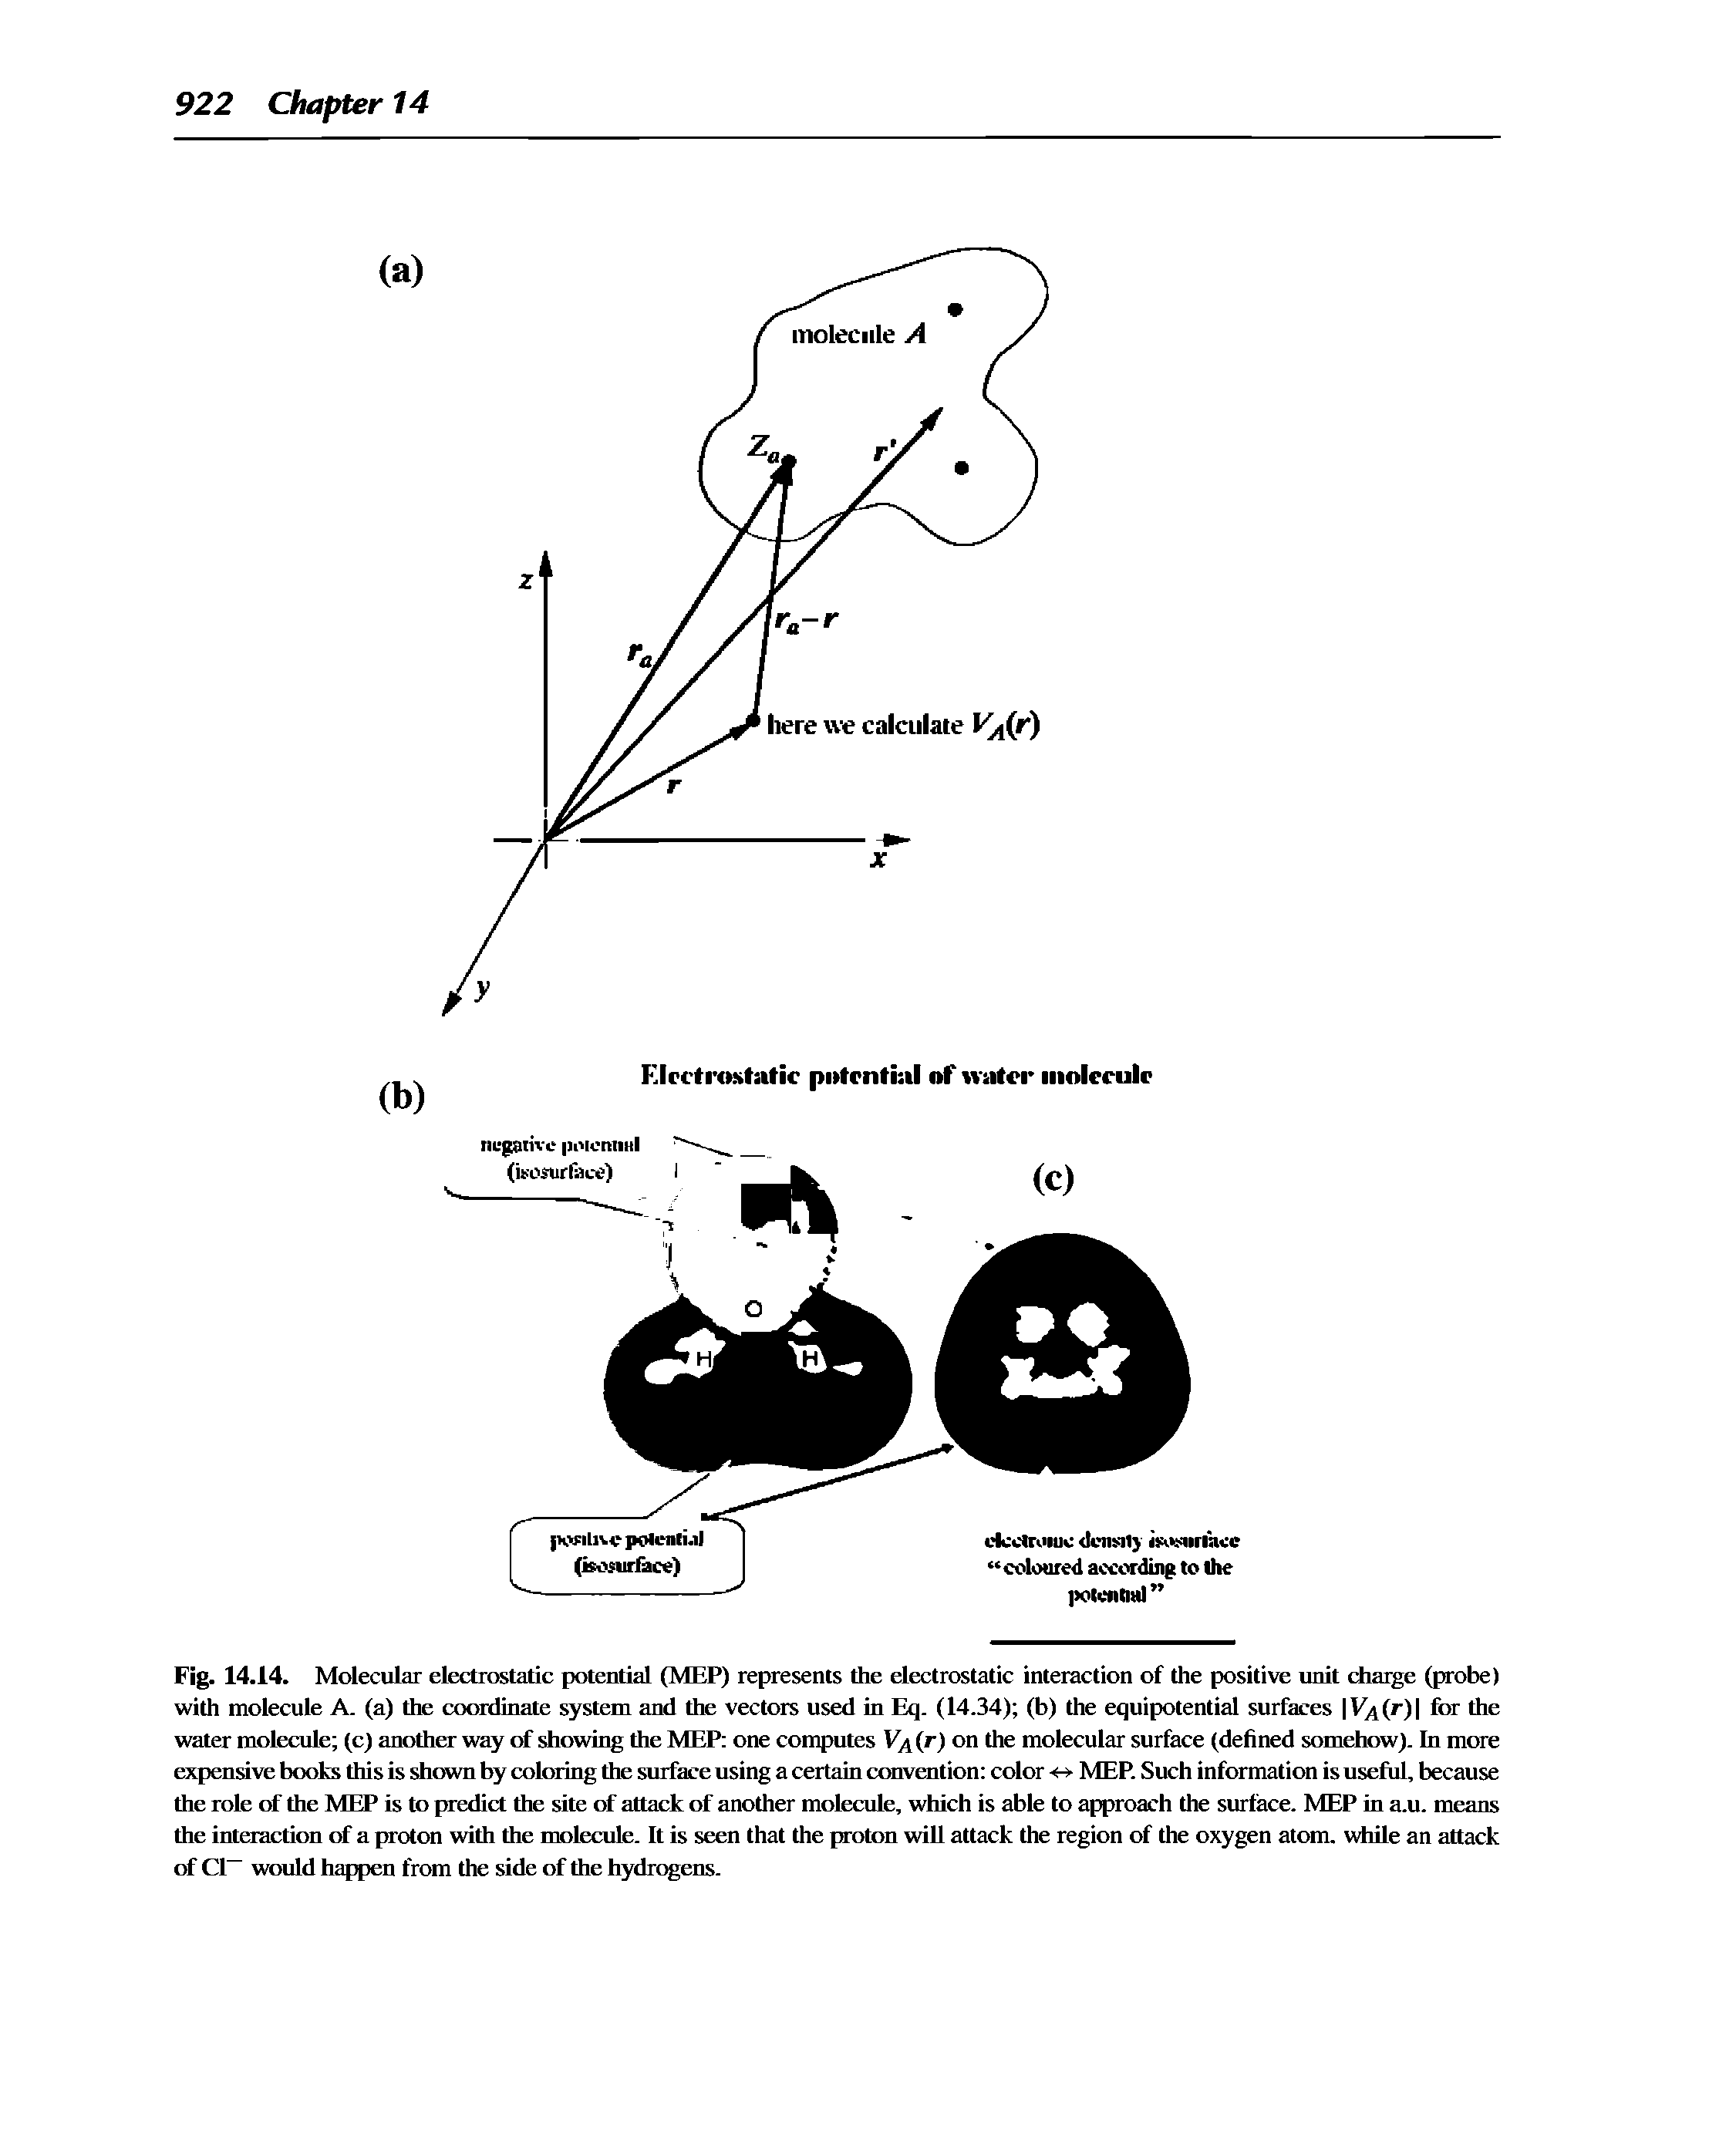 Fig. 14.14. Molecular electrostatic potential (MEP) represents the electrostatic interaction of the positive unit diarge (probe) with molecule A. (a) the coordinate system and the vectors used in Eq. (14.34) (b) the equipotential surfaces V (r) for the water molecule (c) another way of showing the MEP one computes V/ ir) on the molecular surface (defined somehow). In more expensive books this is shown by coloring the surface using a certain convention color <-> MEP. Such information is usefiil, because the role of the MEP is to predict the site of attack of another molecule, which is able to approach the surface. MEP in a.u. means the interaction of a proton with the molecule. It is seen that the proton will attack the region of the oxygen atom, while an attack of CI would happen from the side of the hydrogens.